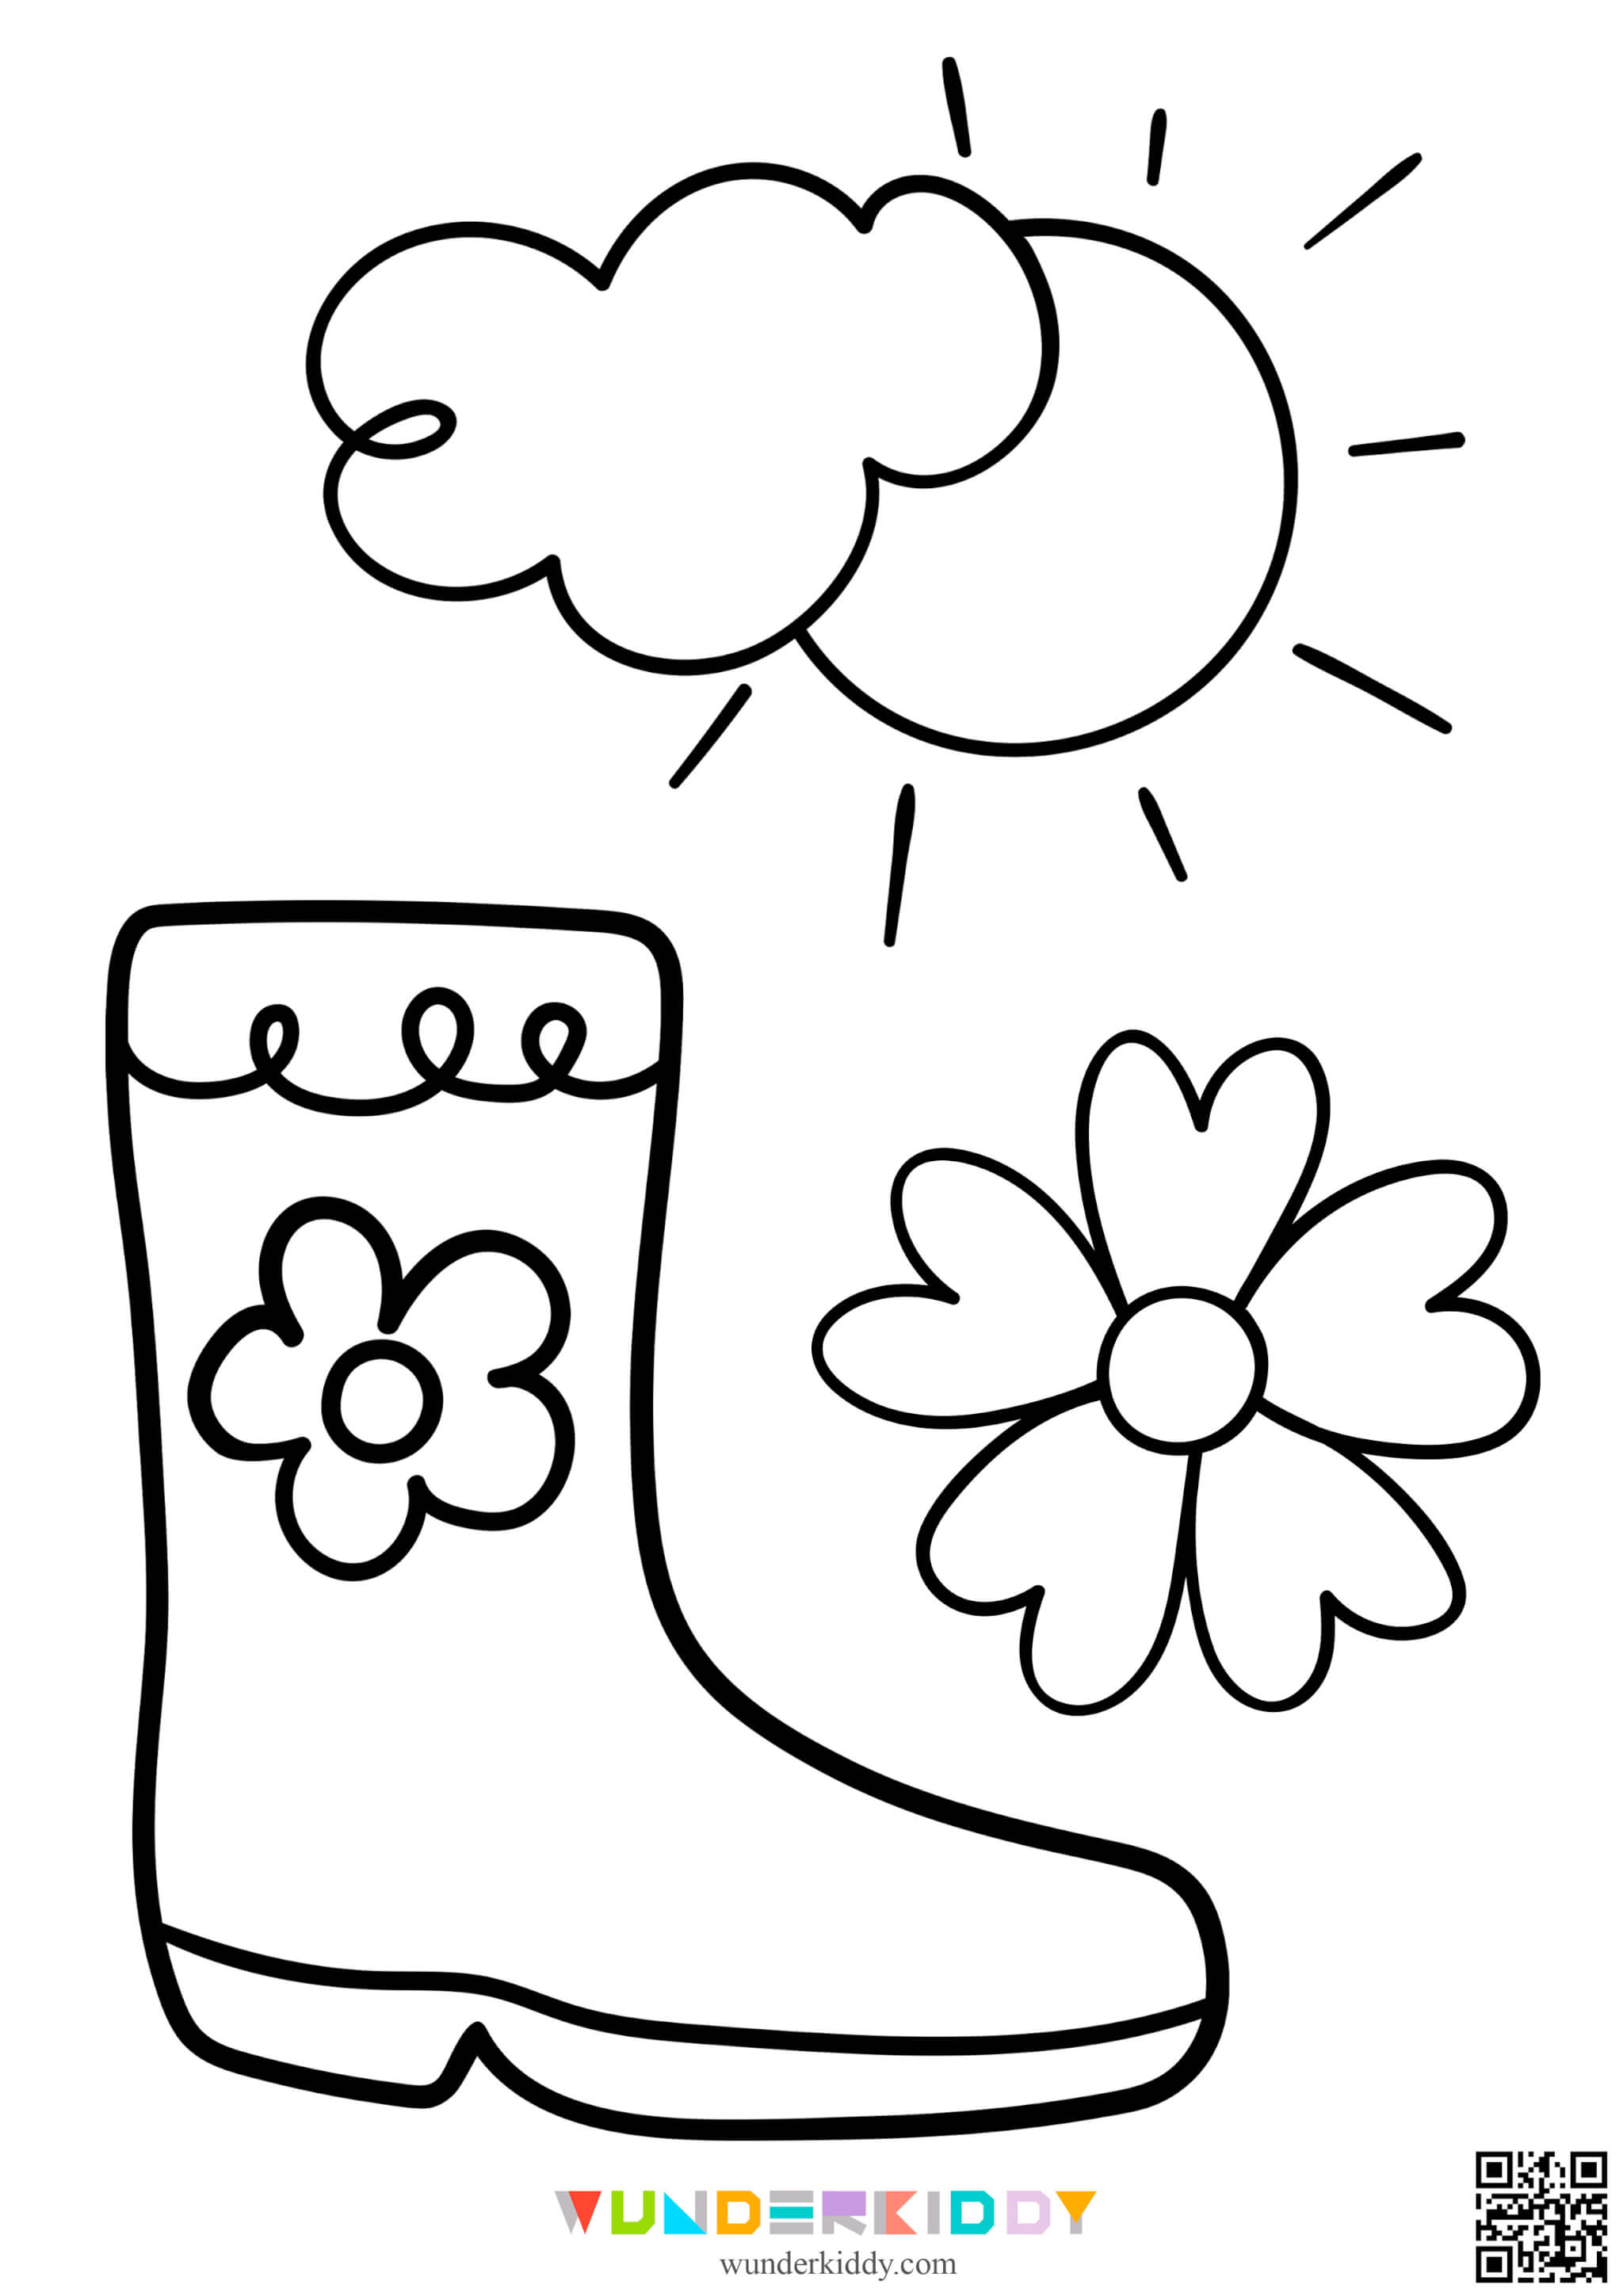 Spring Coloring Pages - Image 14